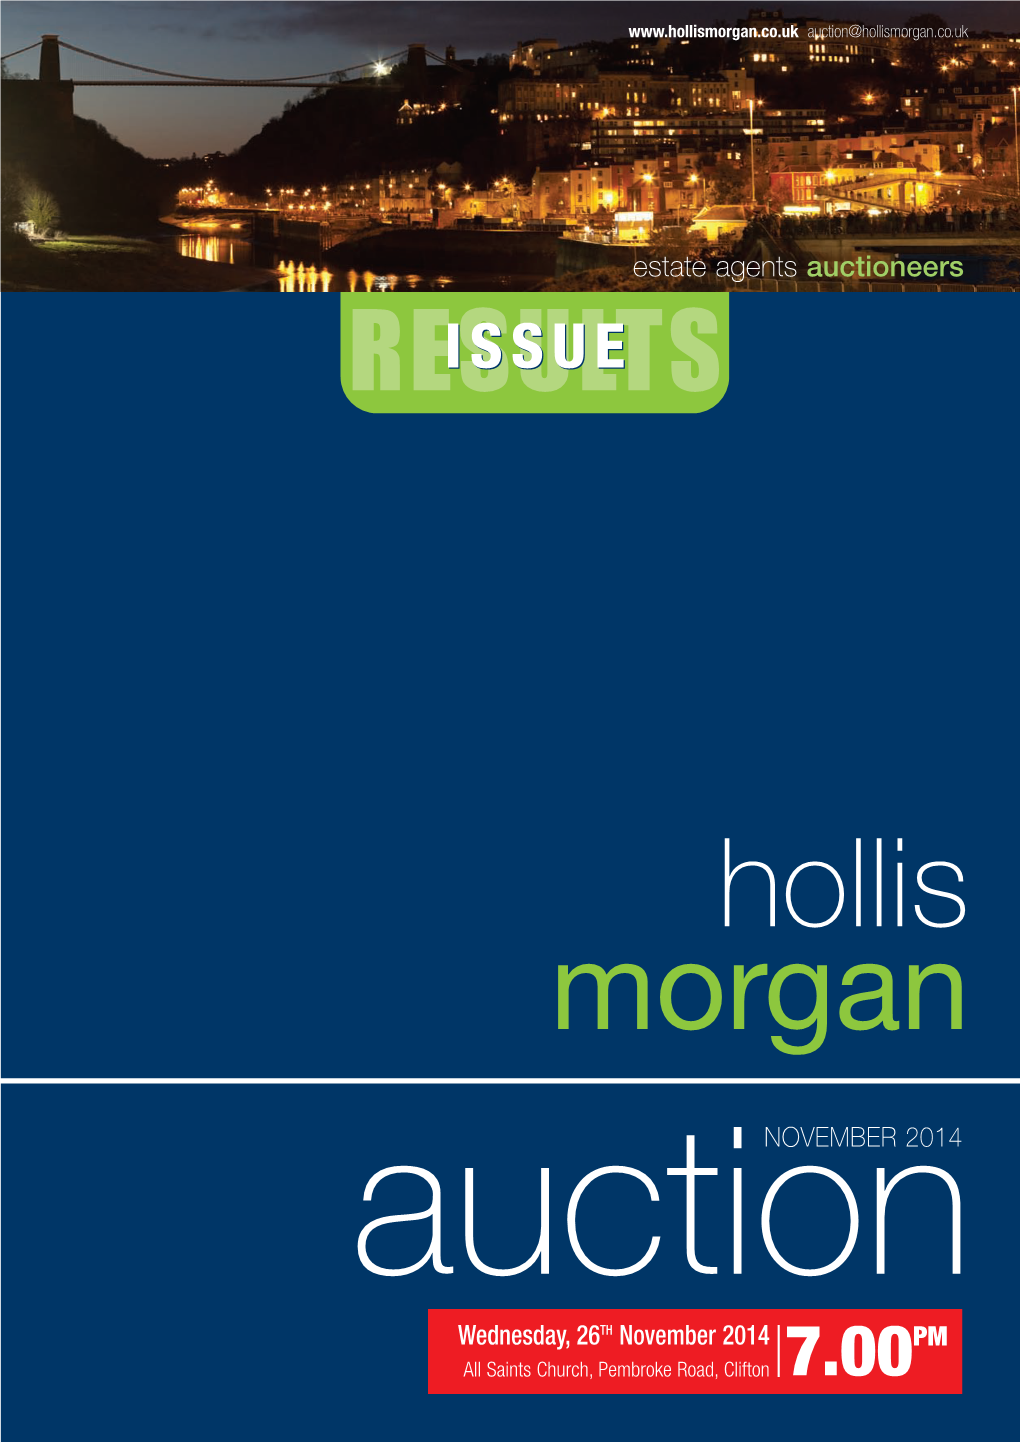 Estate Agents Auctioneers RESULTSISSUE